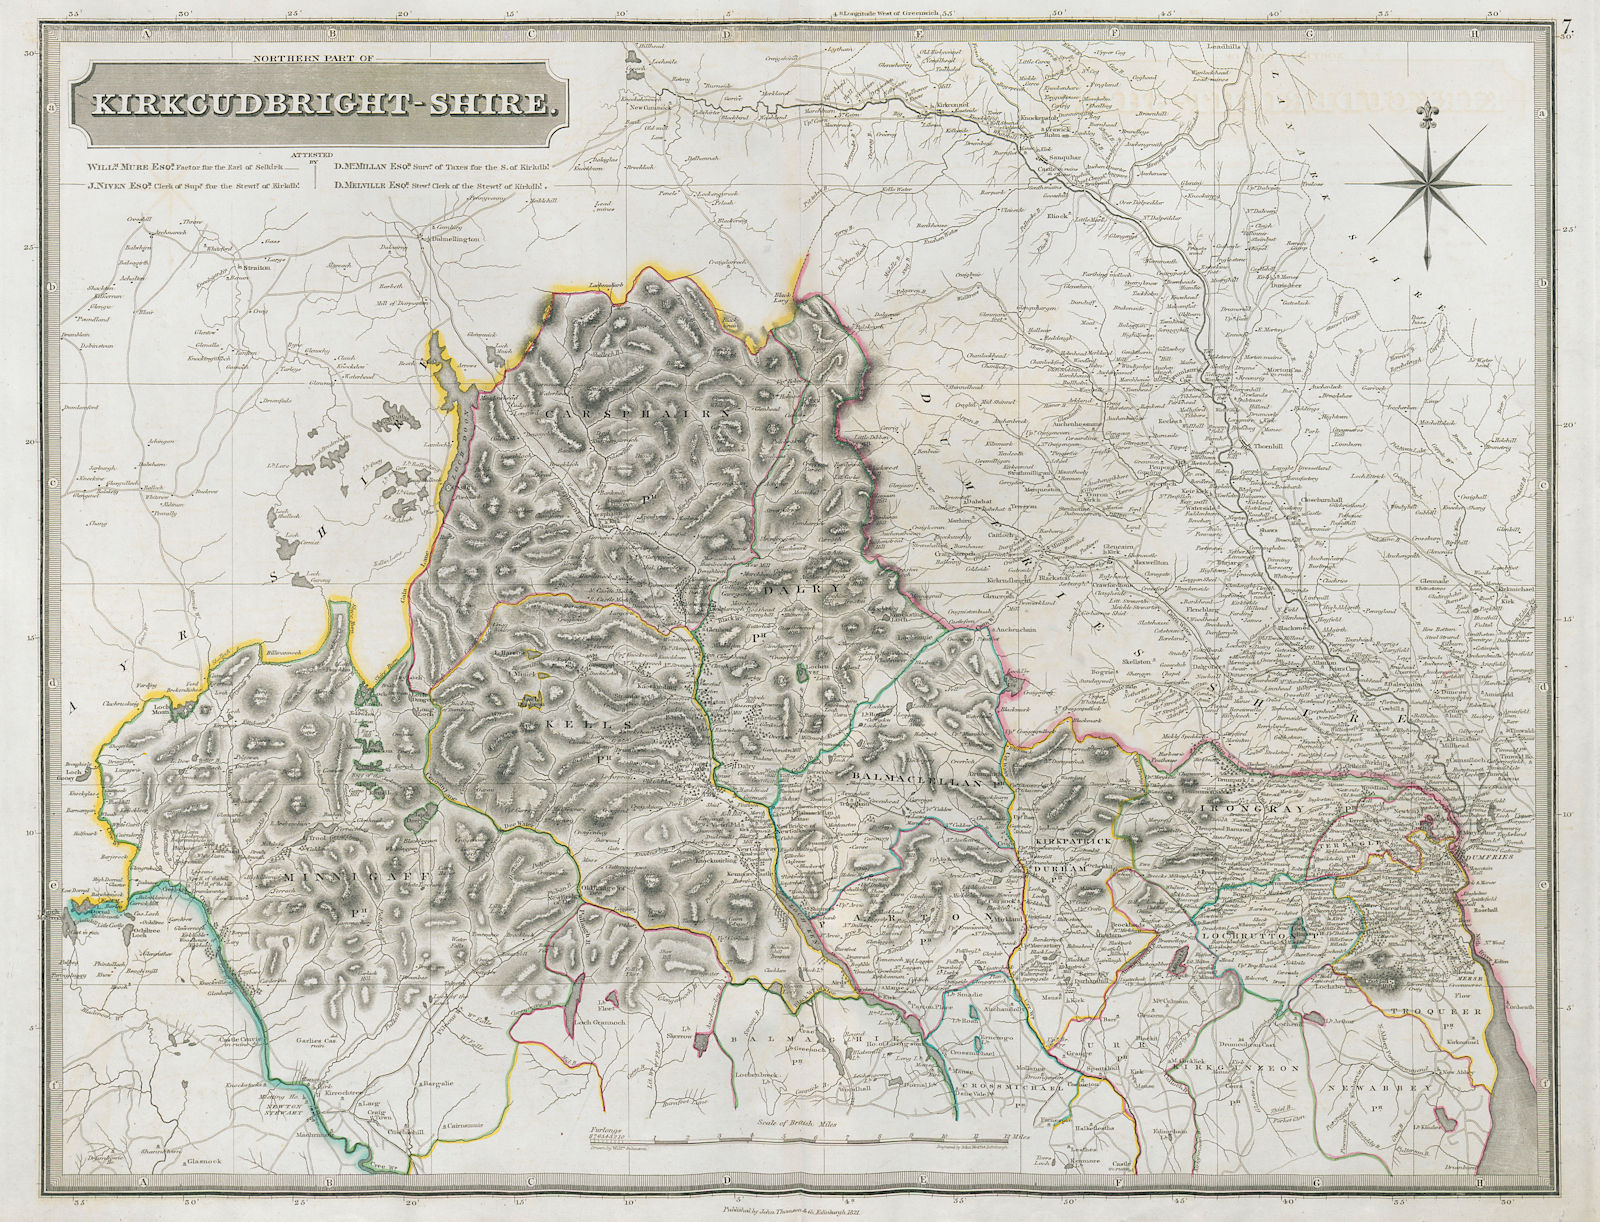 Associate Product Kirkcudbrightshire north. Dumfries Shawhead Sanquhar Thornhill. THOMSON 1832 map